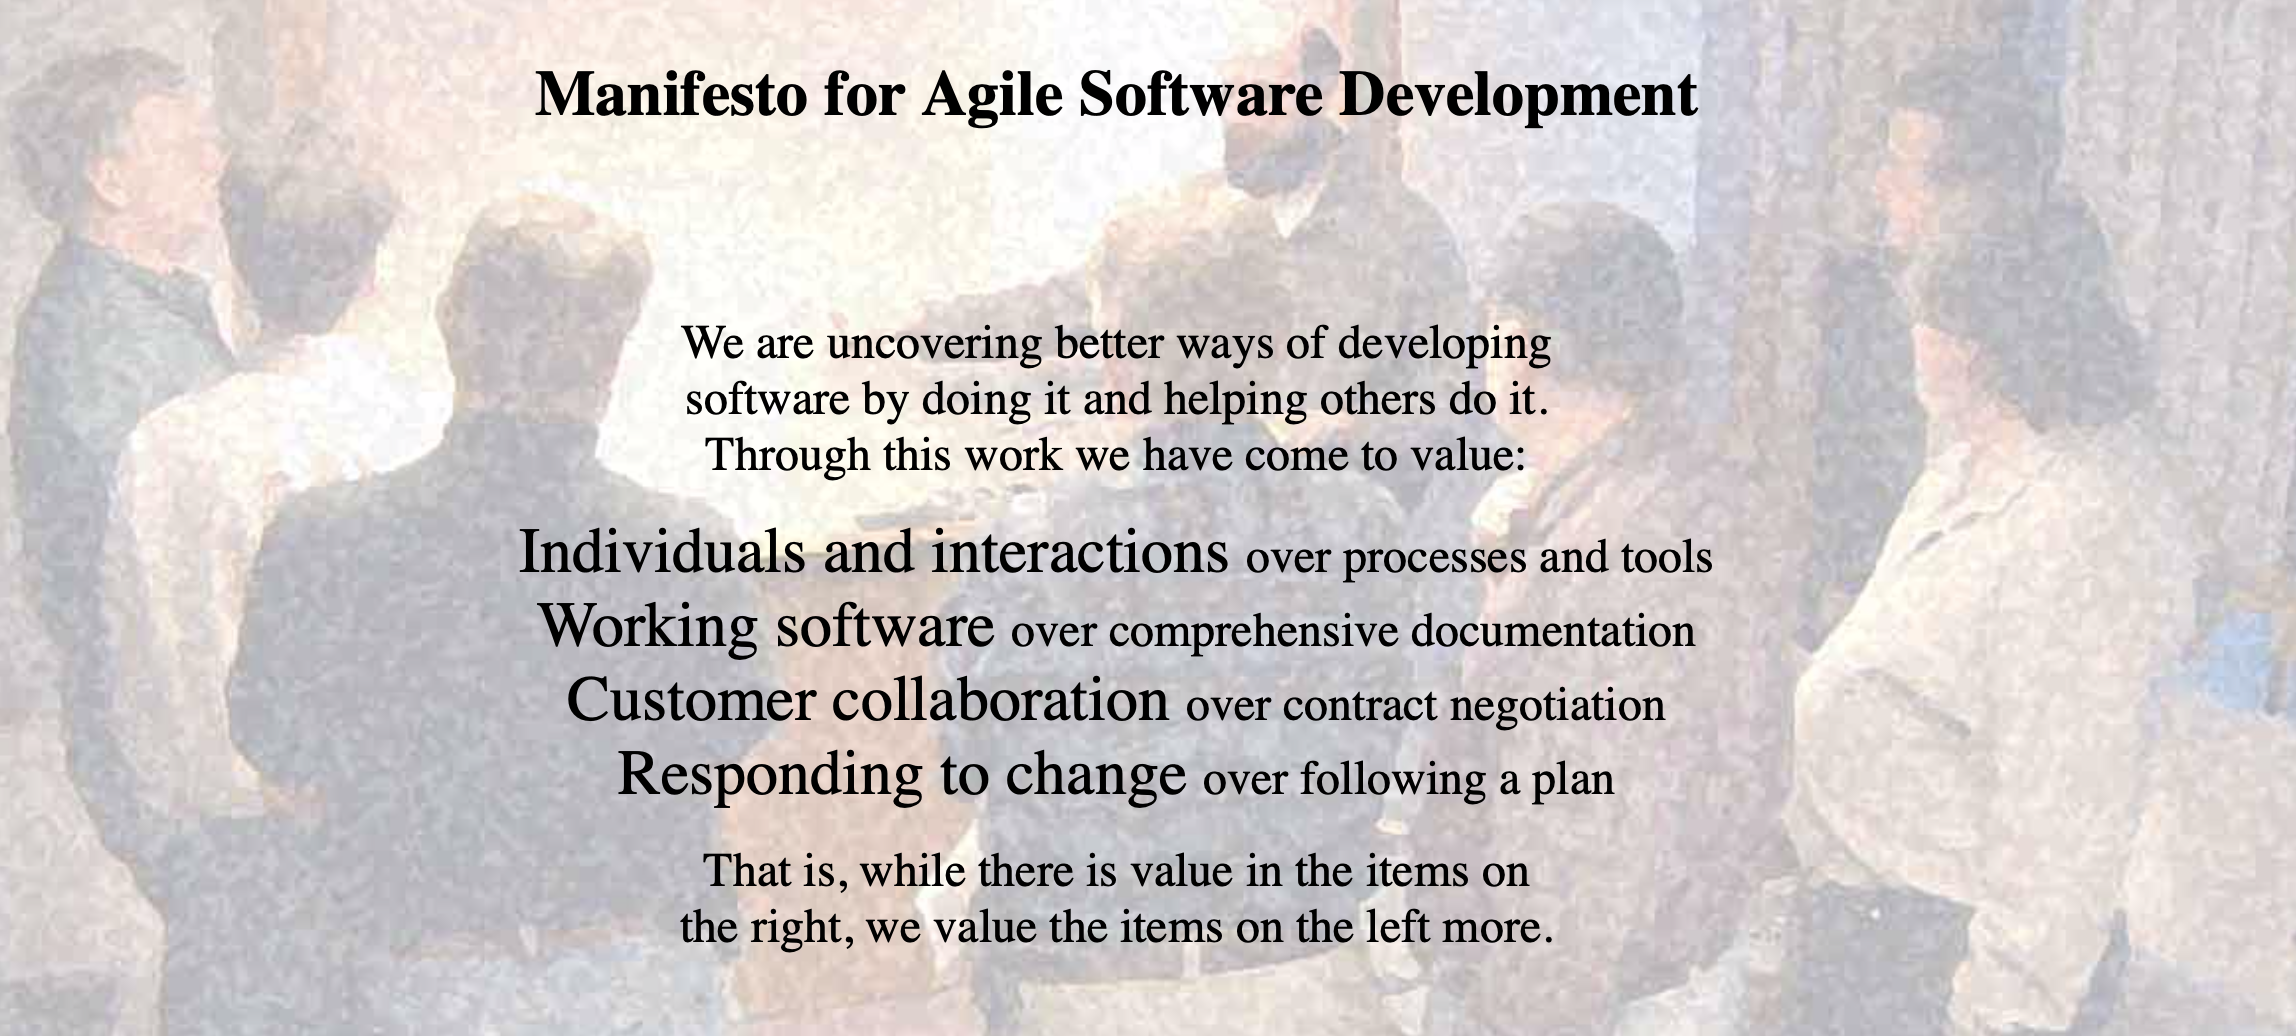 What is Agile and Why is it Important?